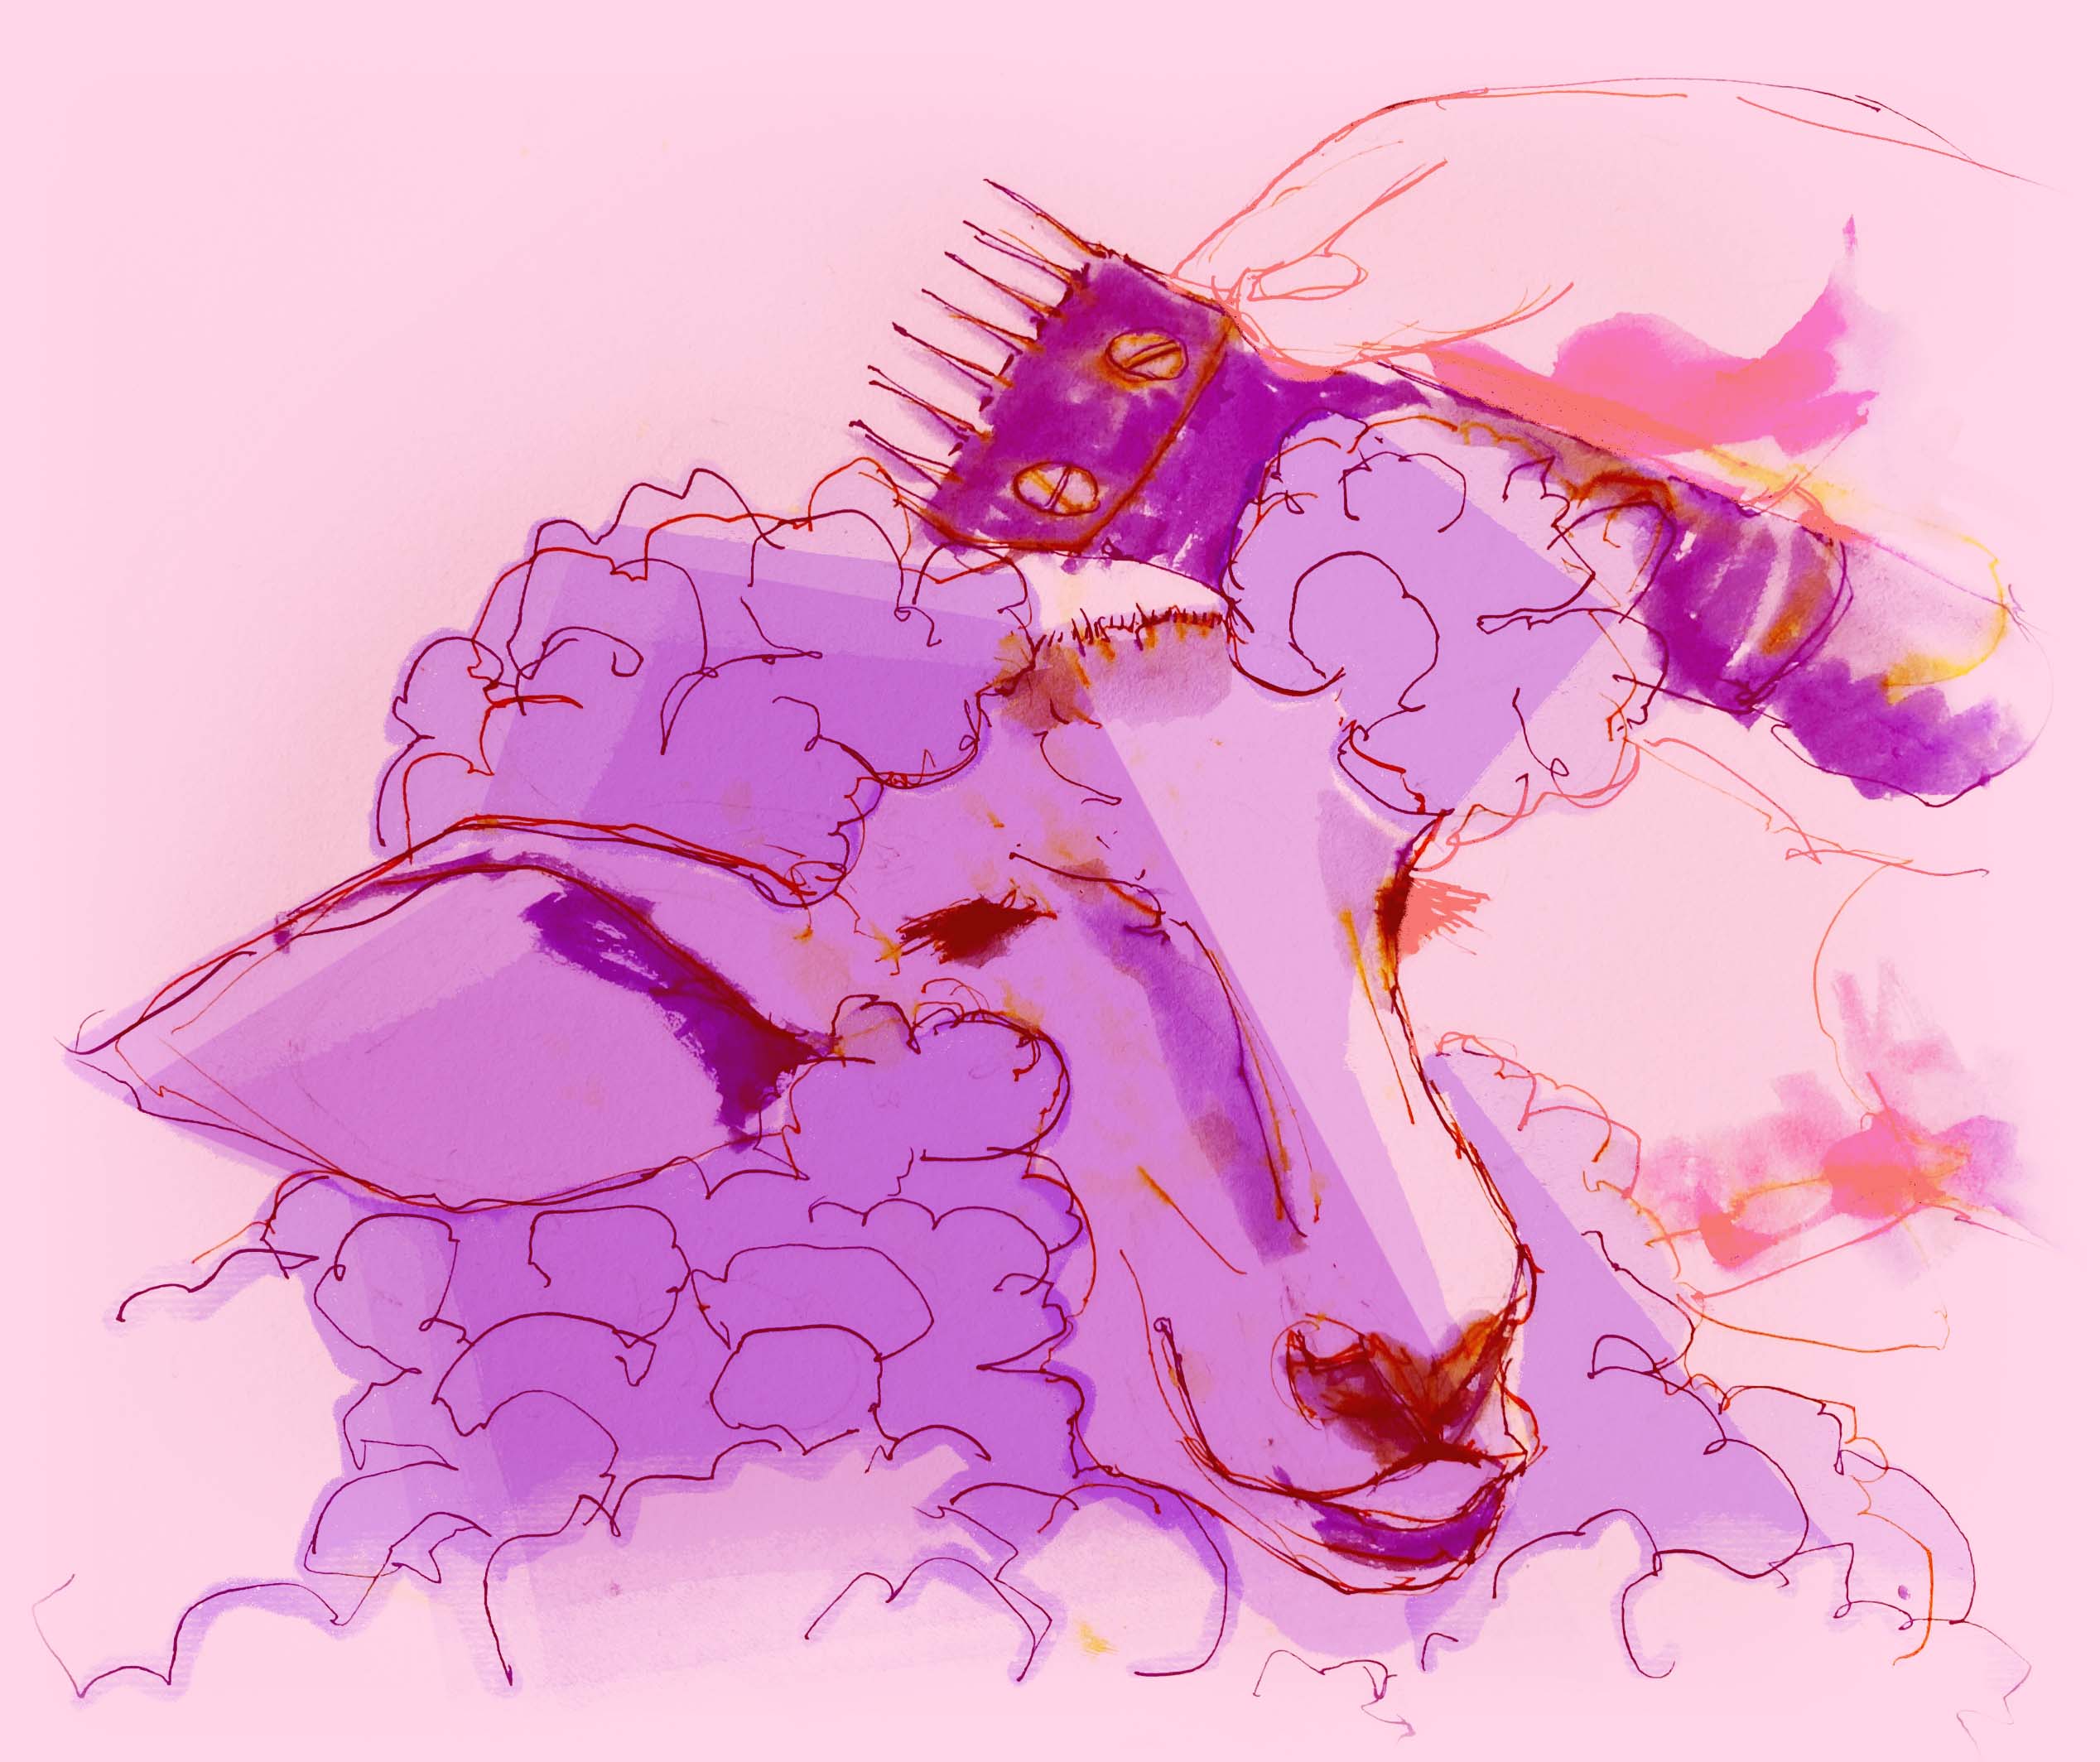 illustration of a sheep being sheared. background is pink and the sheep is purple.